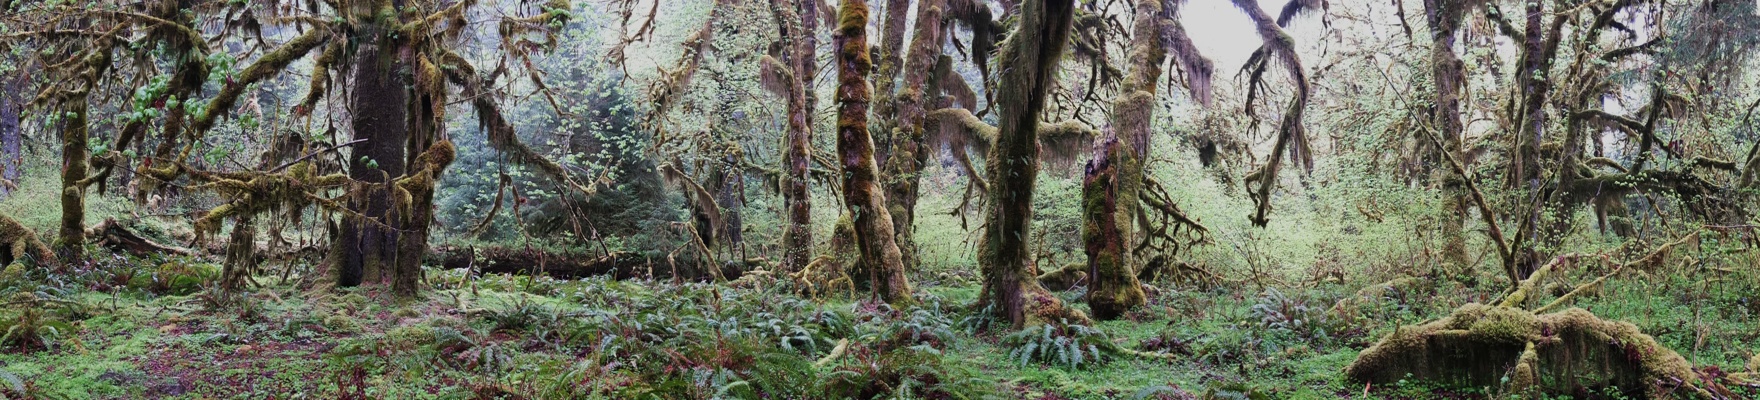 The moss covered tree's of the Hoh Rain Forest, Olympic Pensula National Park